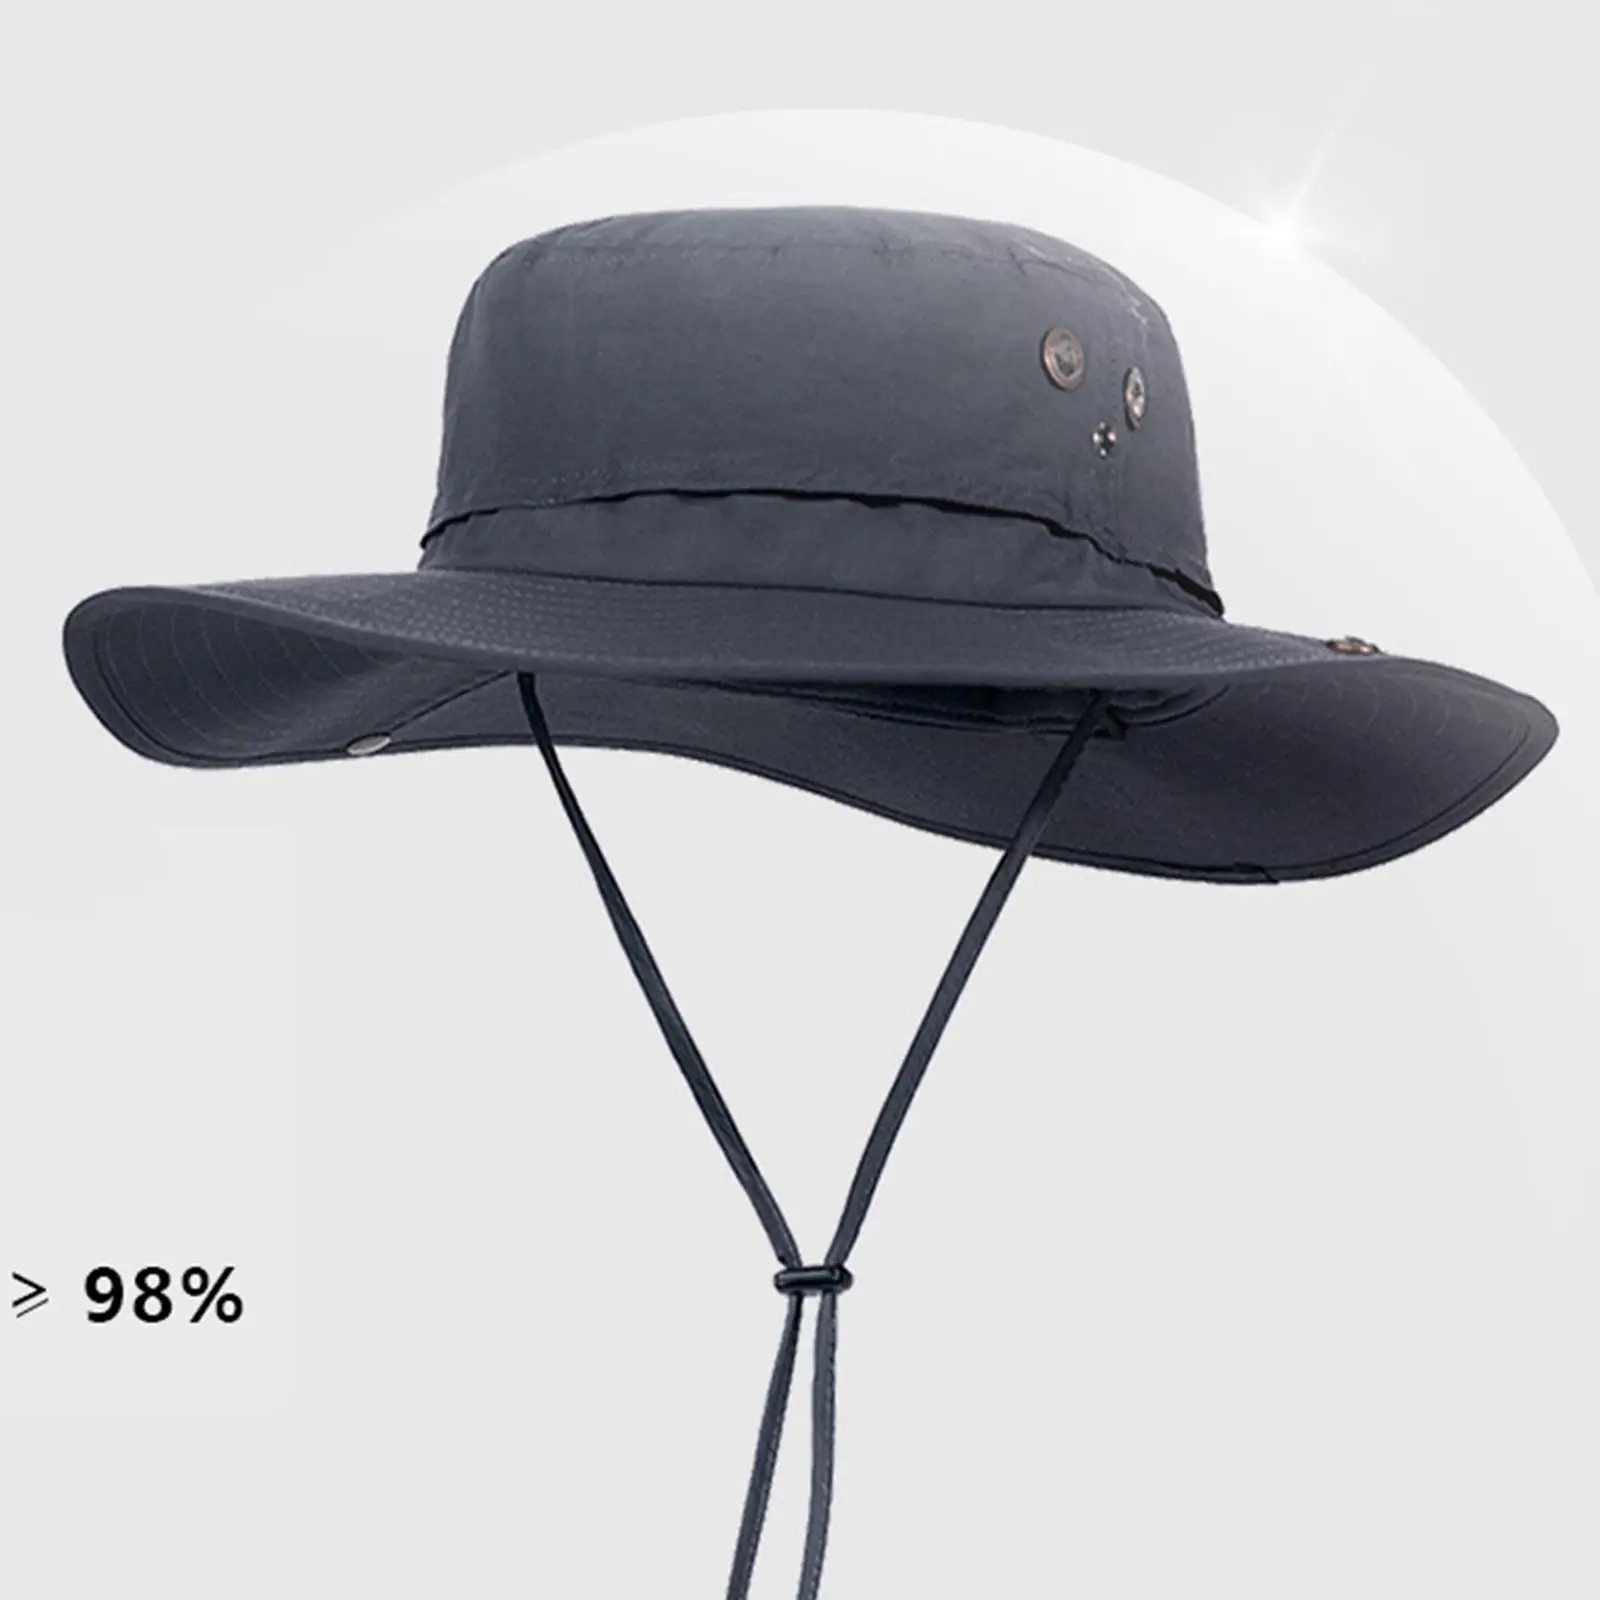 Bucket Hat Sunhat with Strings Adjustable Foldable Breathable Wide Brim Sun Hat for Fishing Hat Camping Beach Hiking Adult